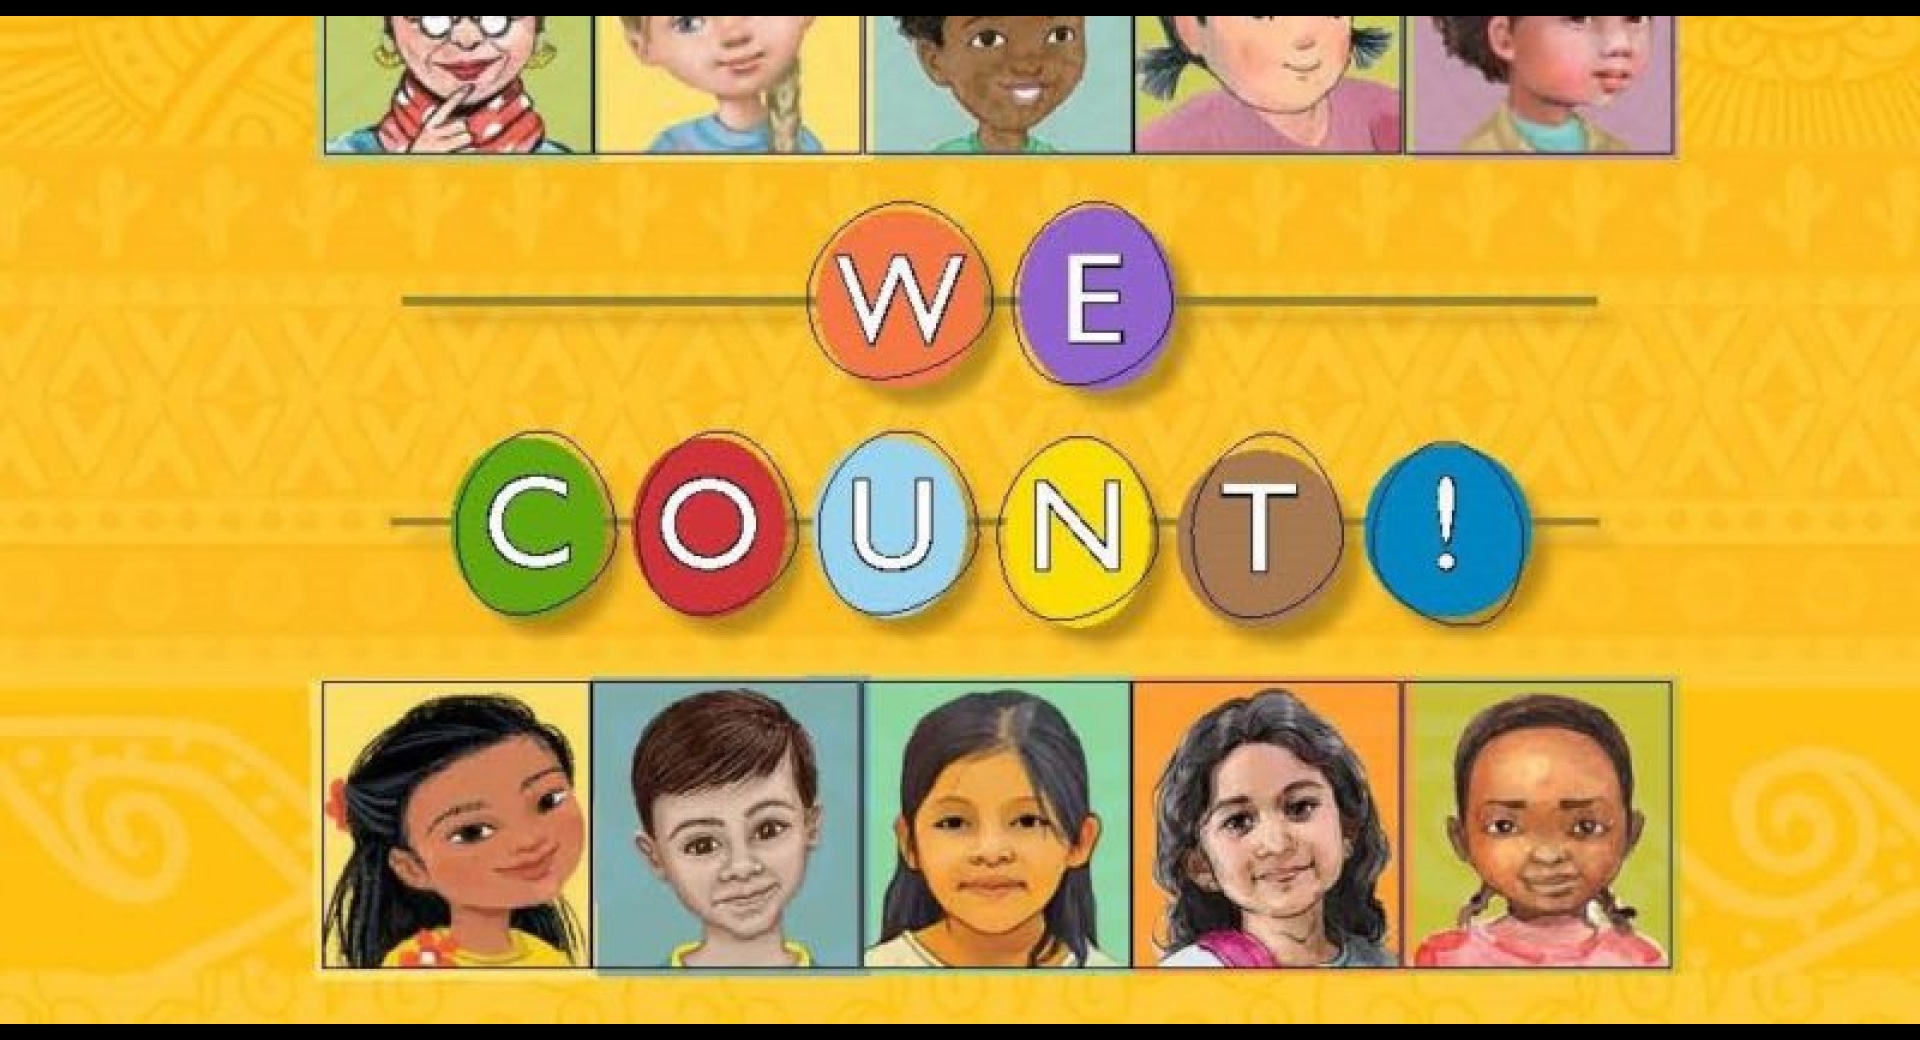 CFVI Brings WE COUNT! A 2020 Census Counting Book to Families in the USVI